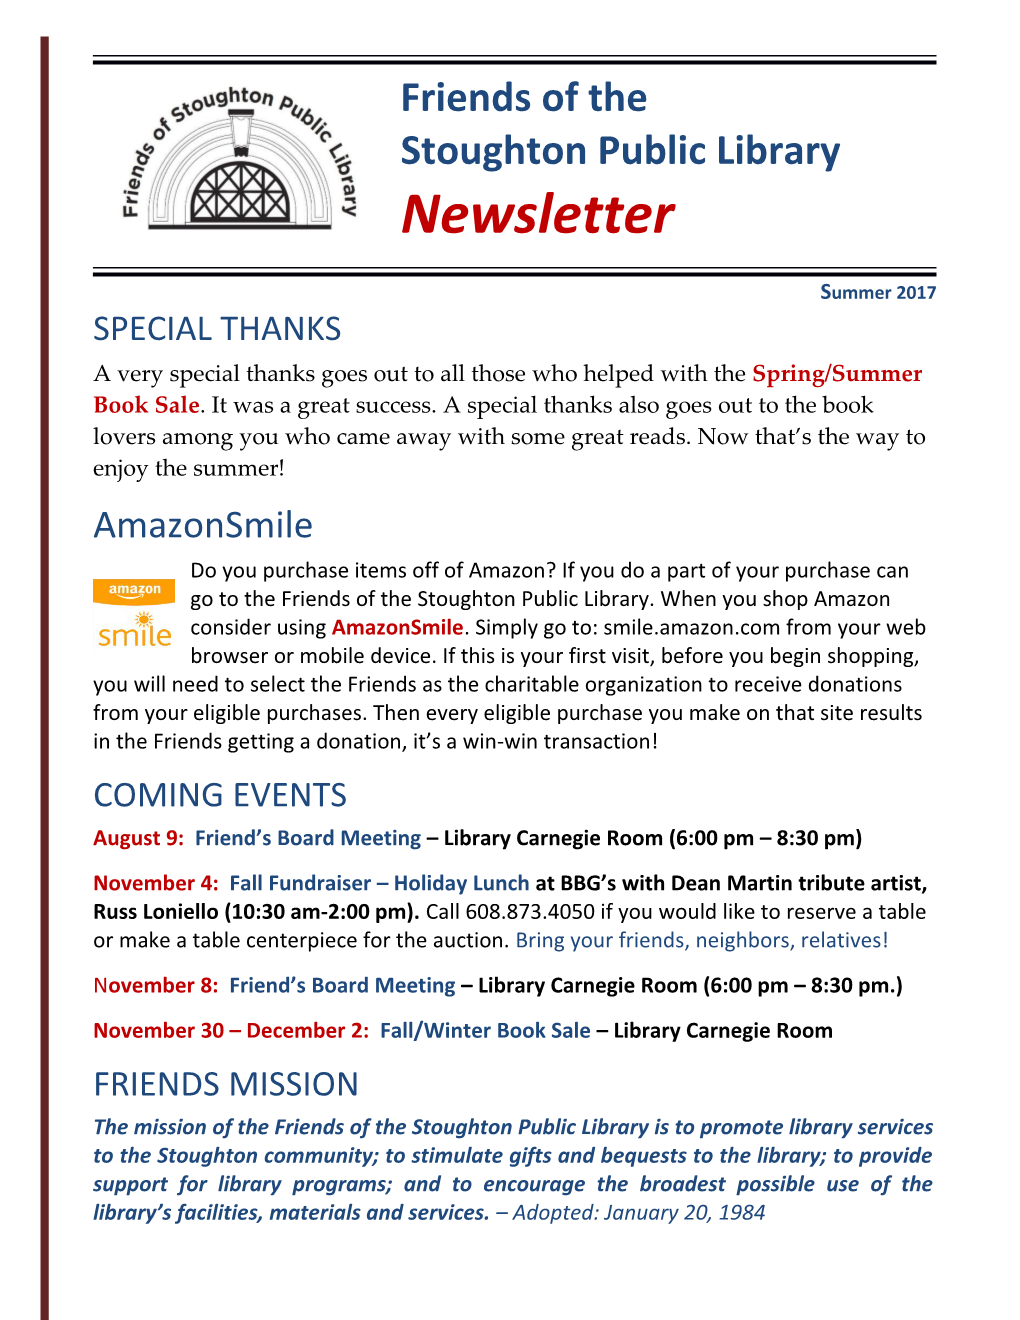 The Friends of the Stoughton Public Librarynewsletter 1 Page Summer 2017